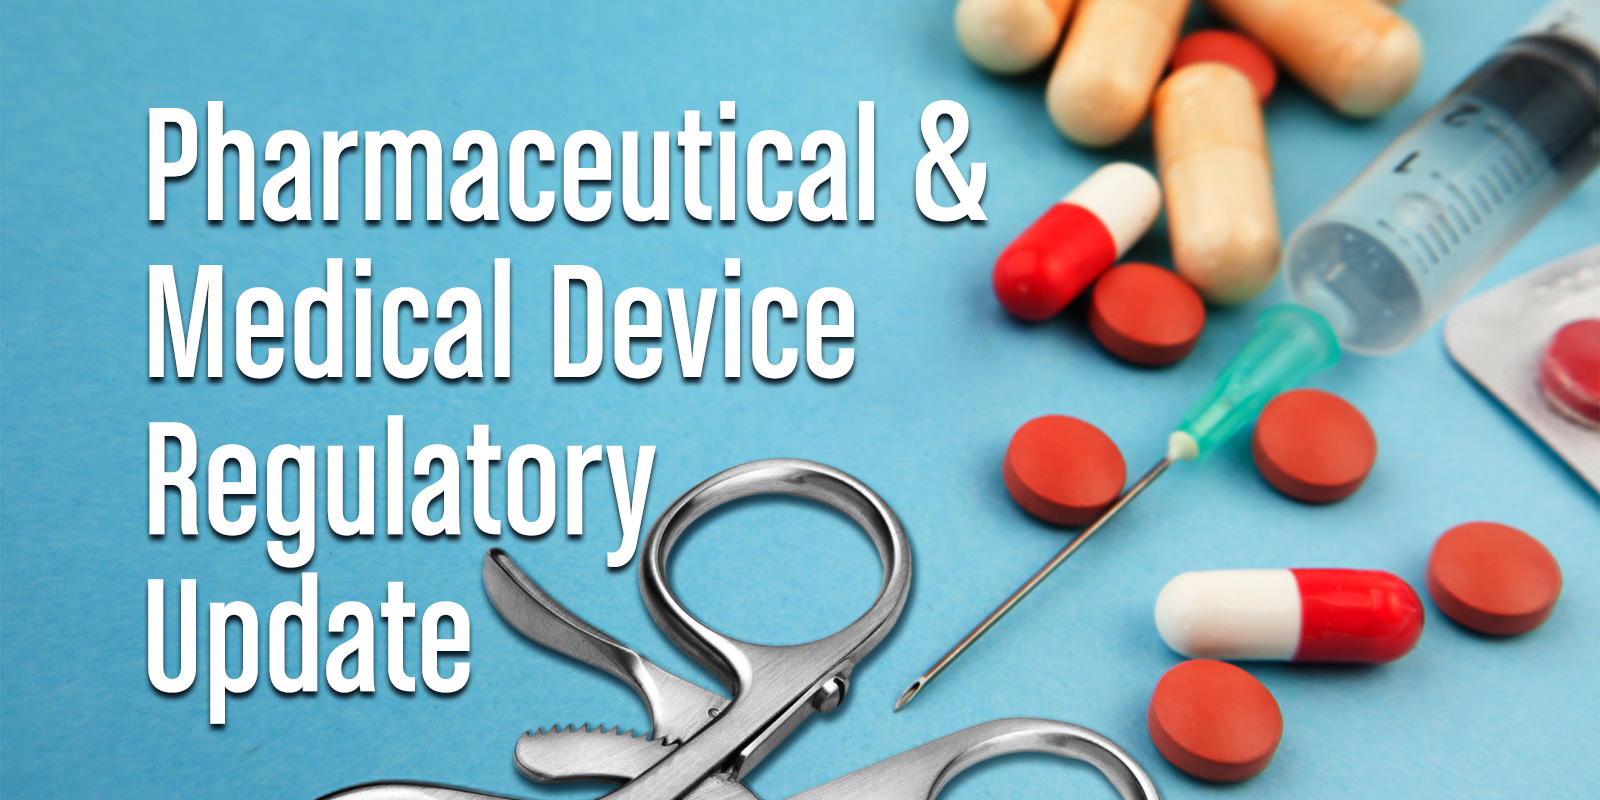 Pharmaceutical & Medical Device Regulatory Update, Vol. IV, Issue 1